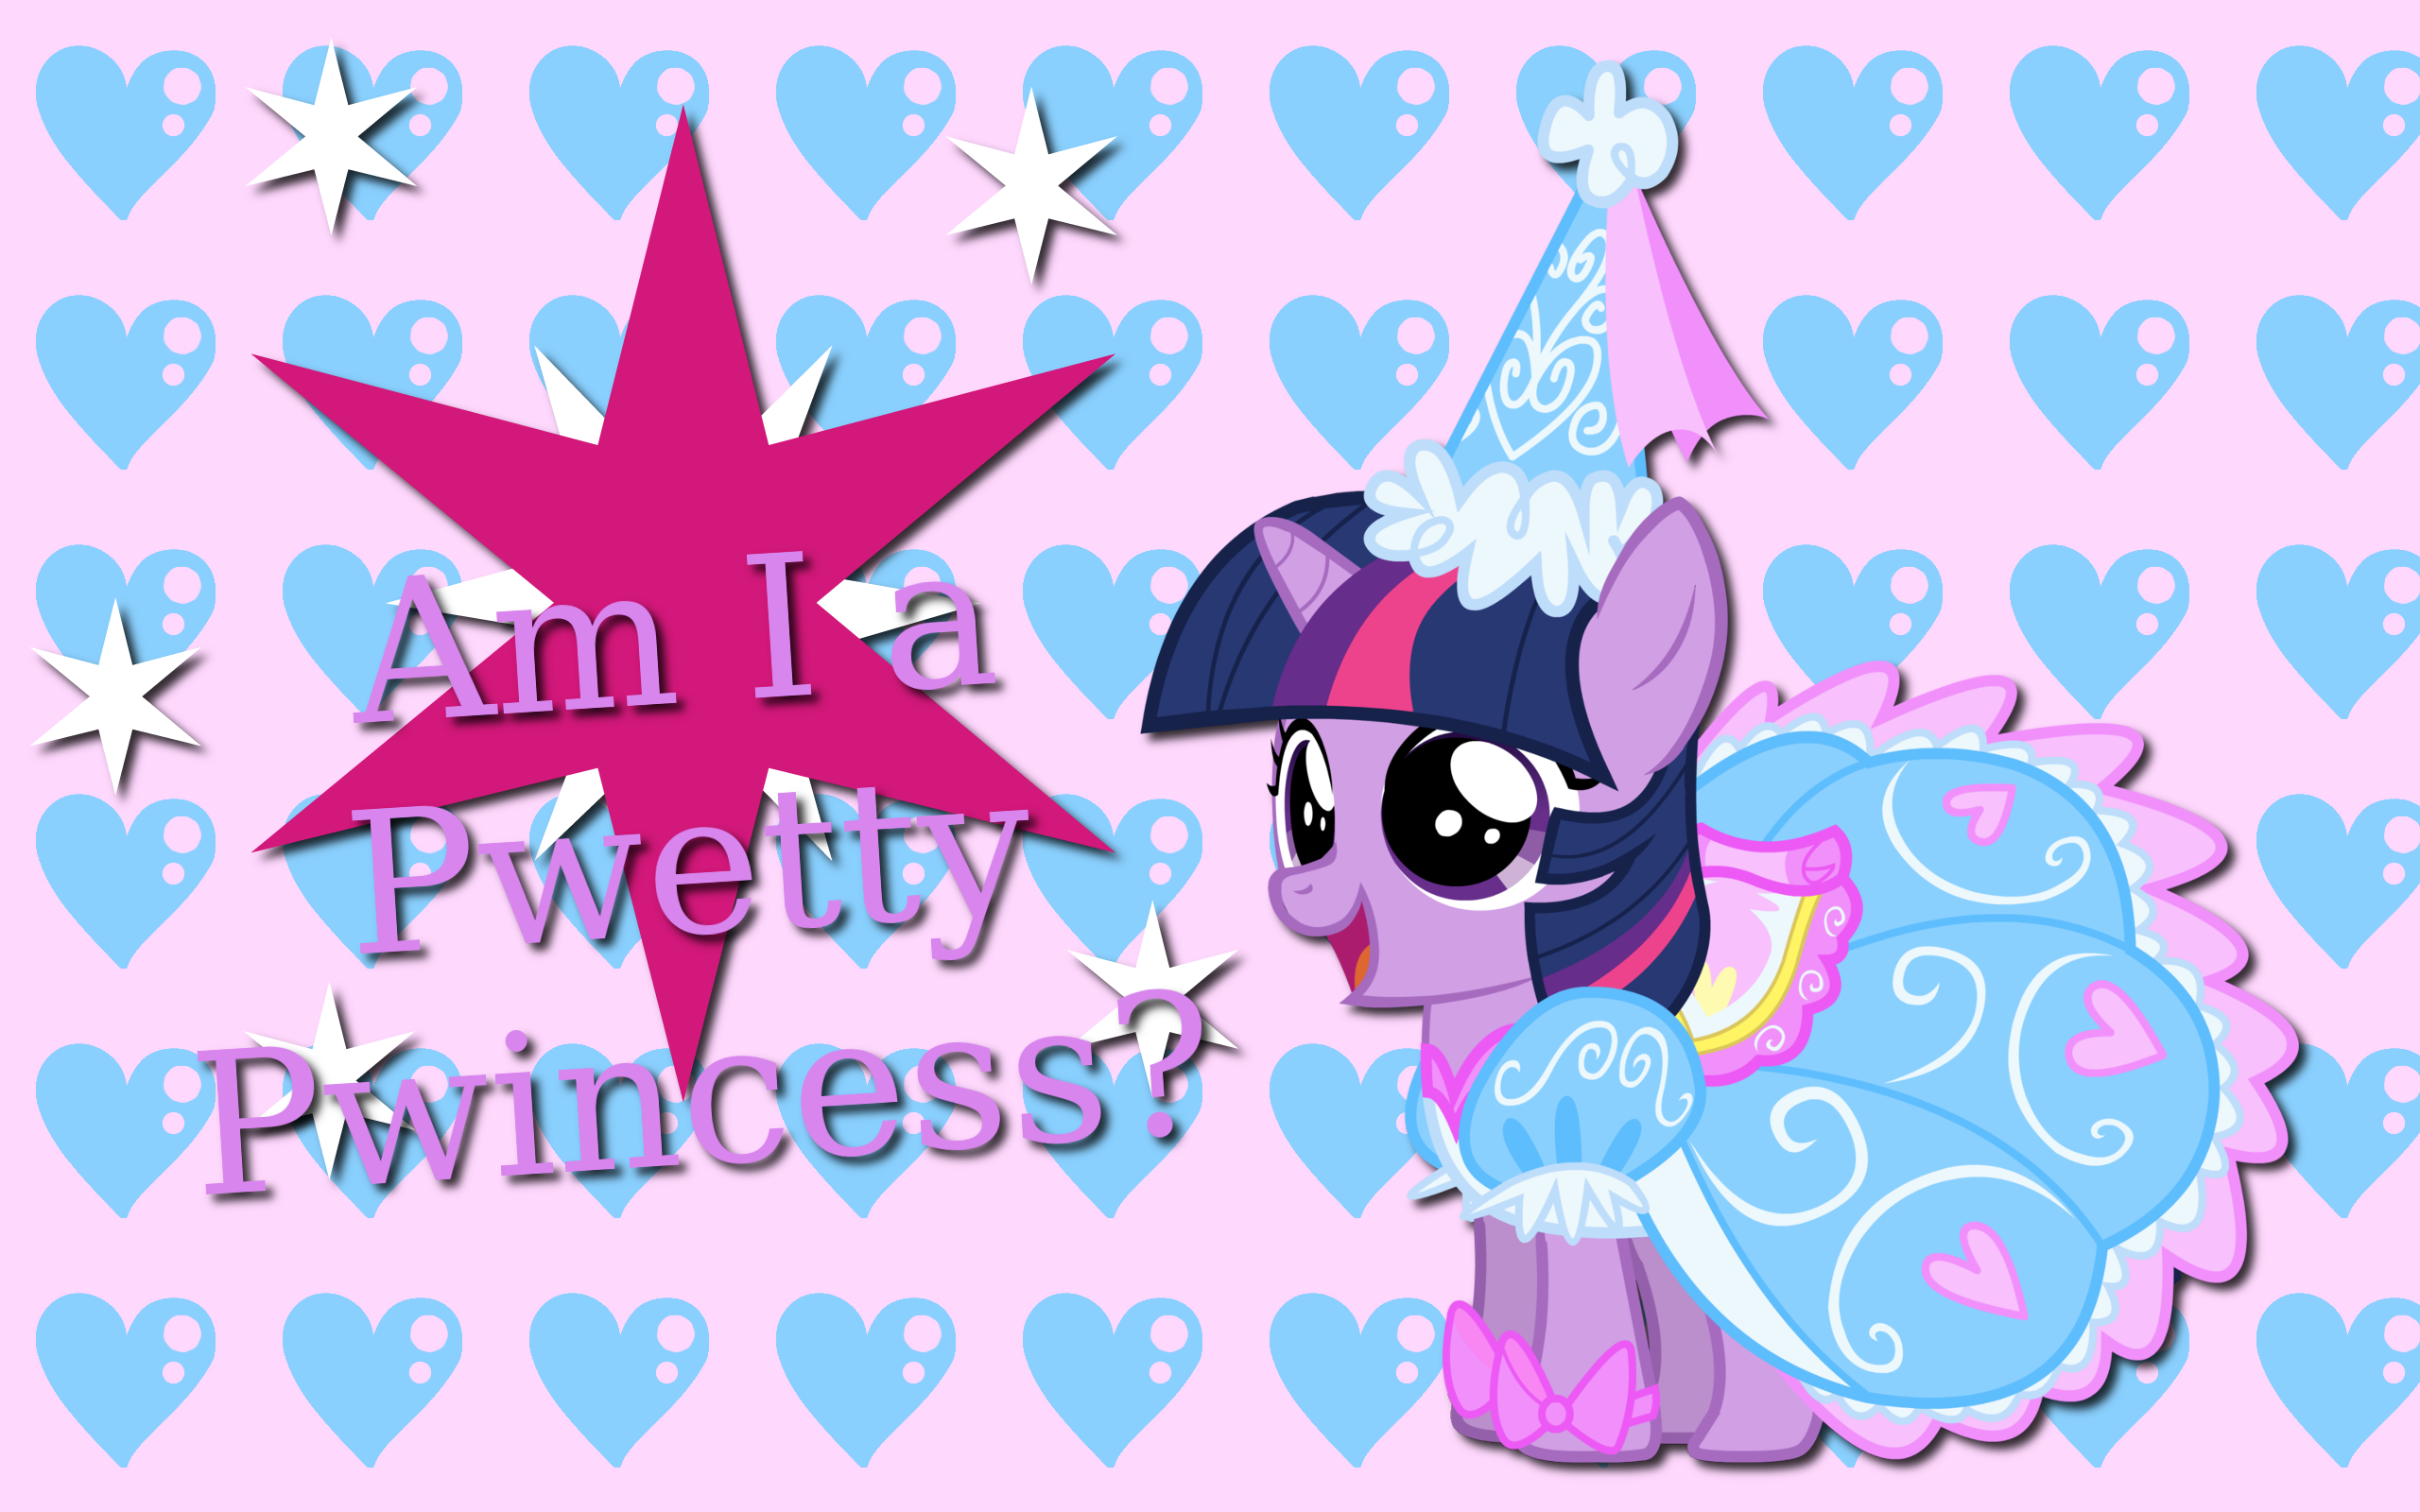 Pwetty Pwincess WP by AliceHumanSacrifice0, Mixermike622 and ooklah